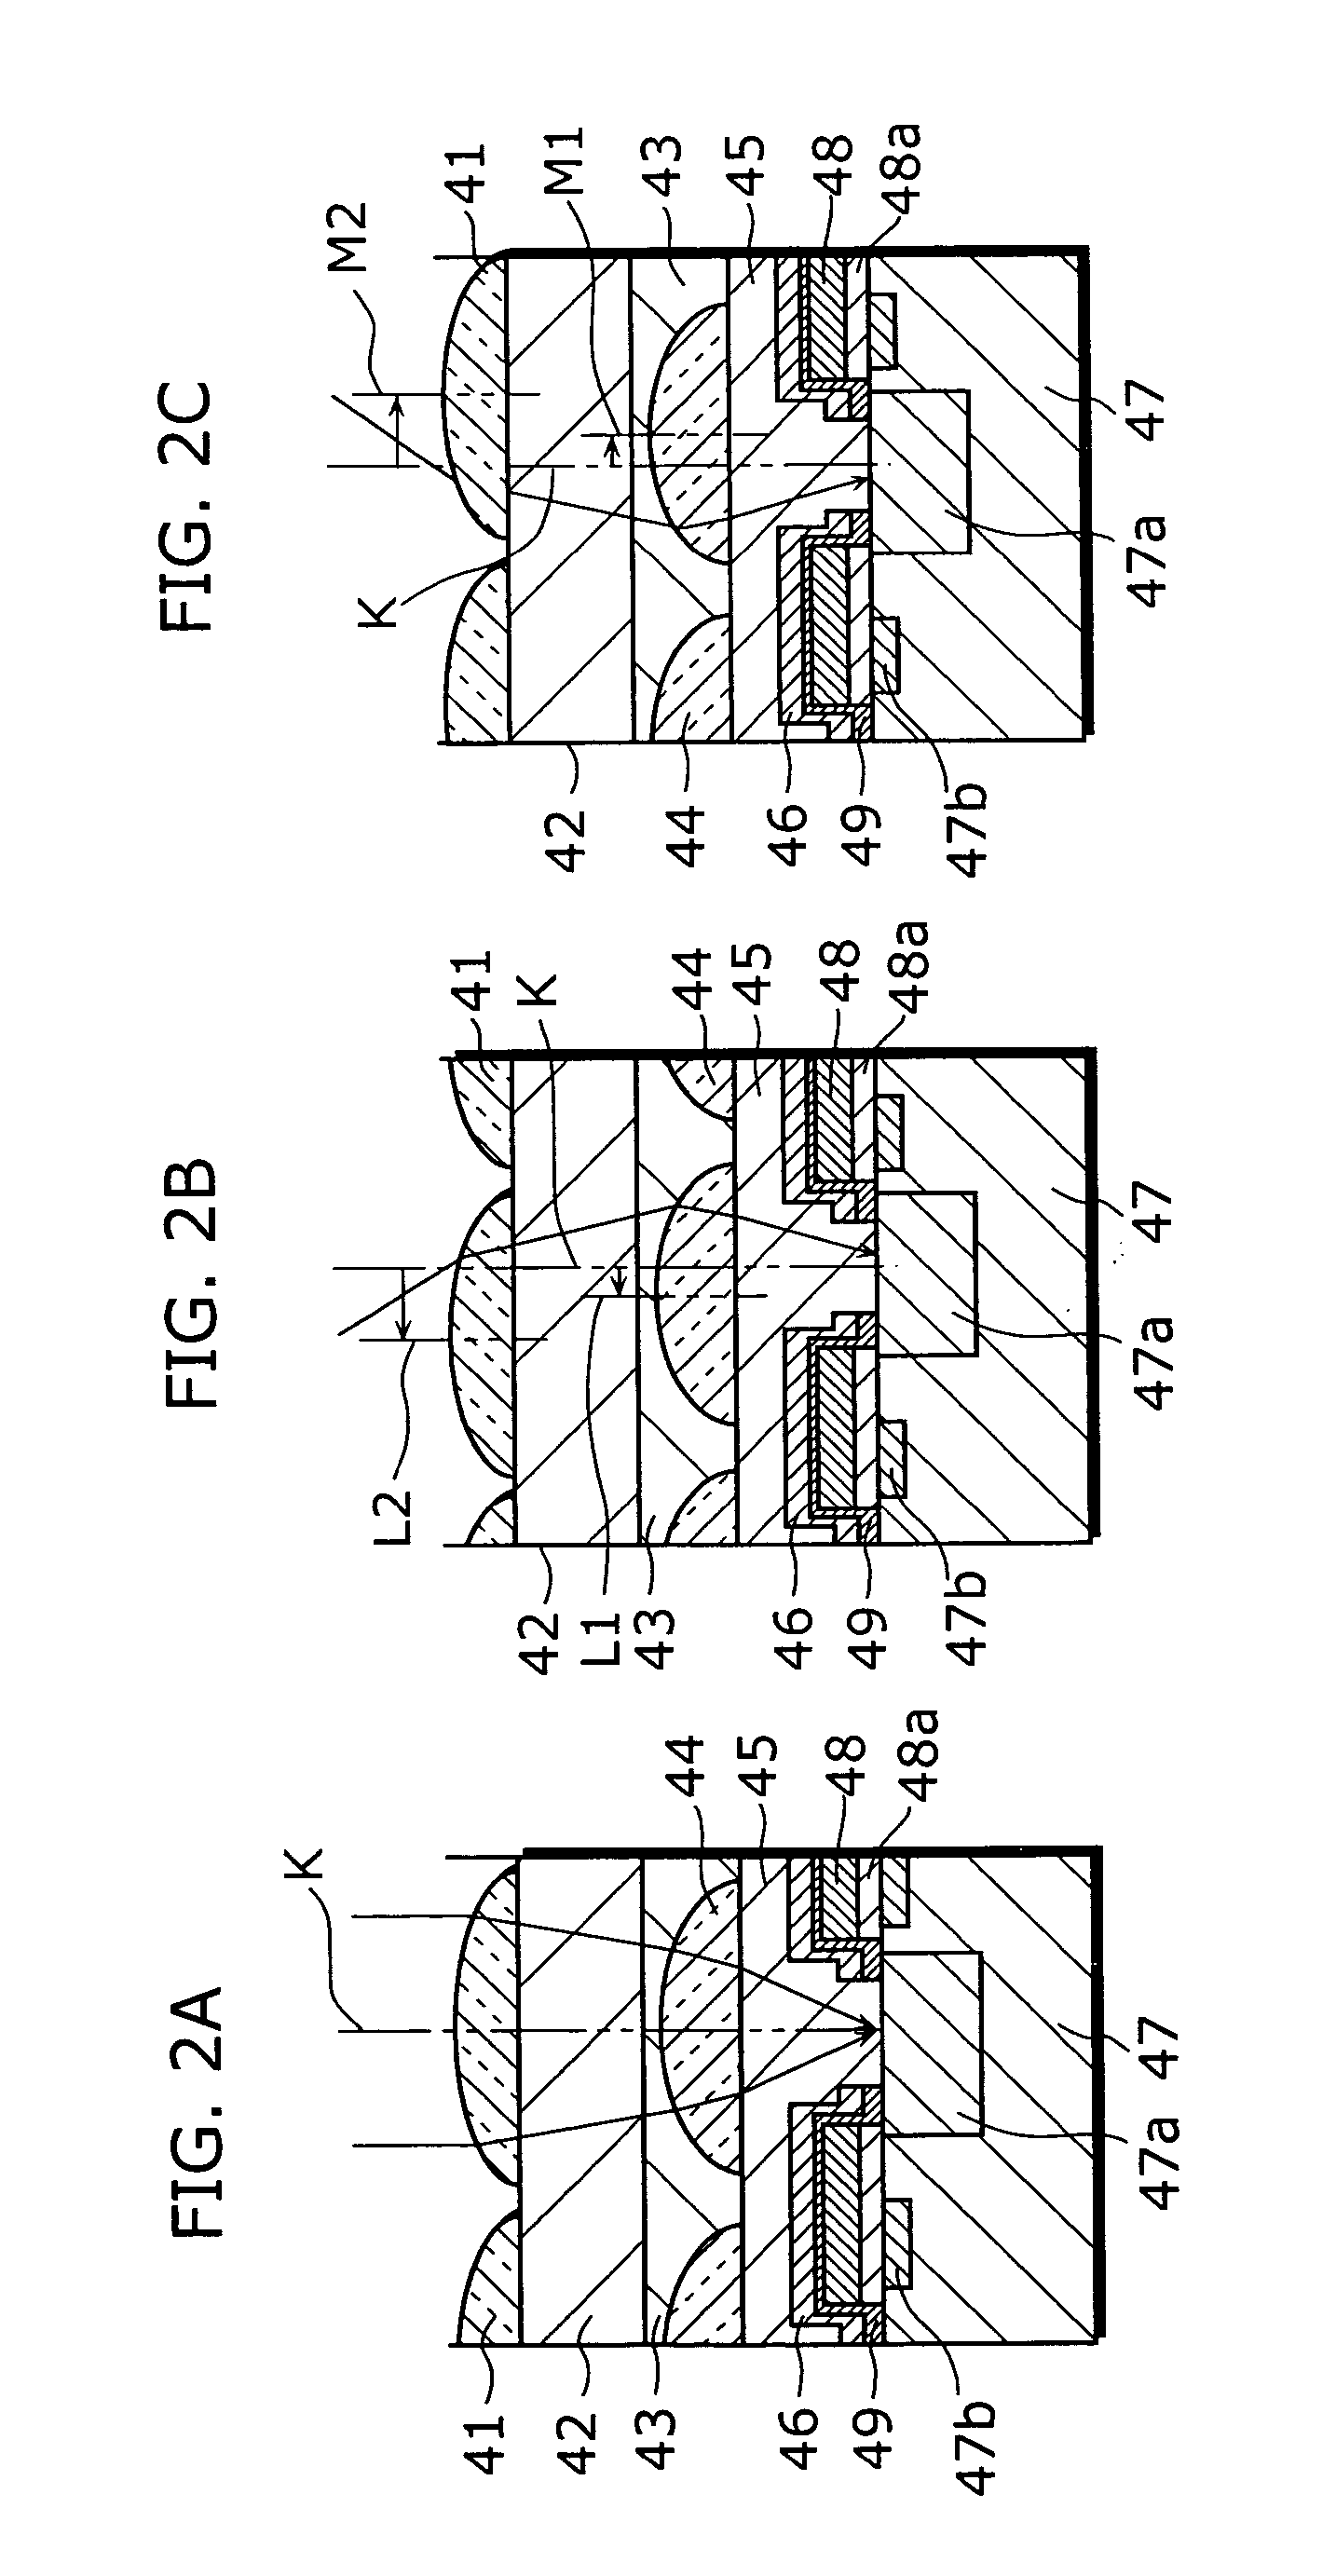 Solid-state imaging device and manufacturing method of solid-state imaging device